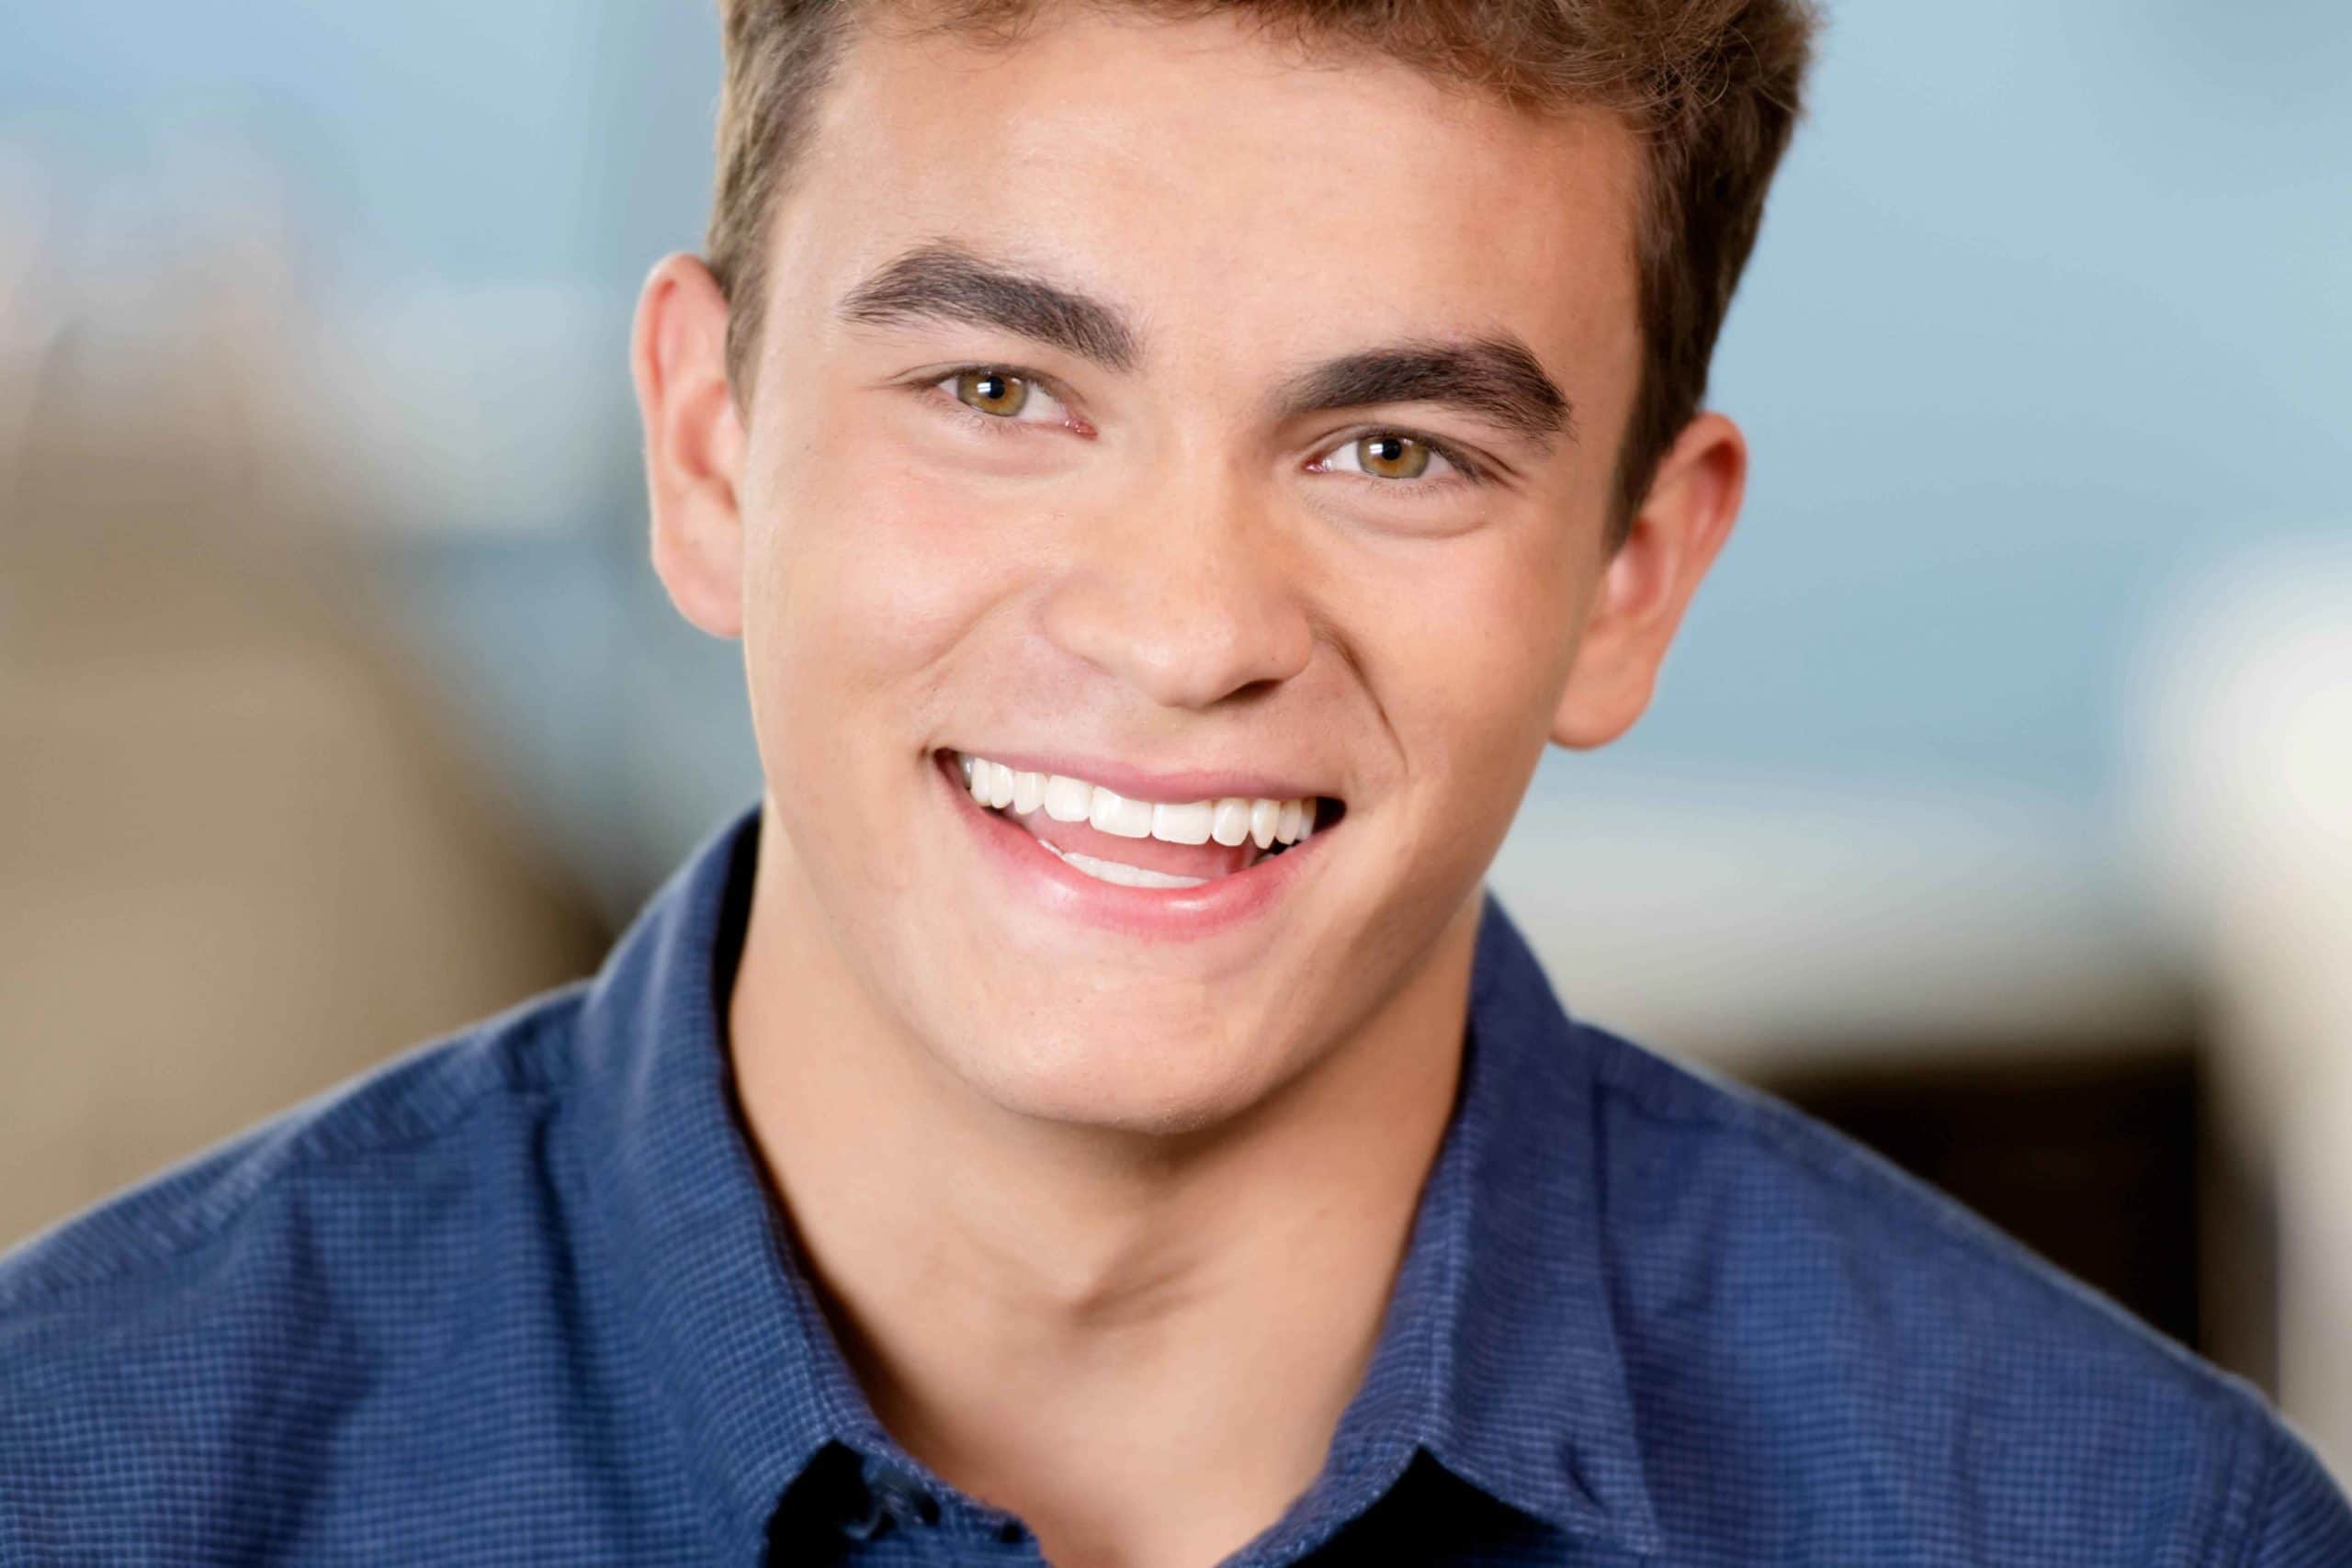 A smiling teen boy with brown hair.